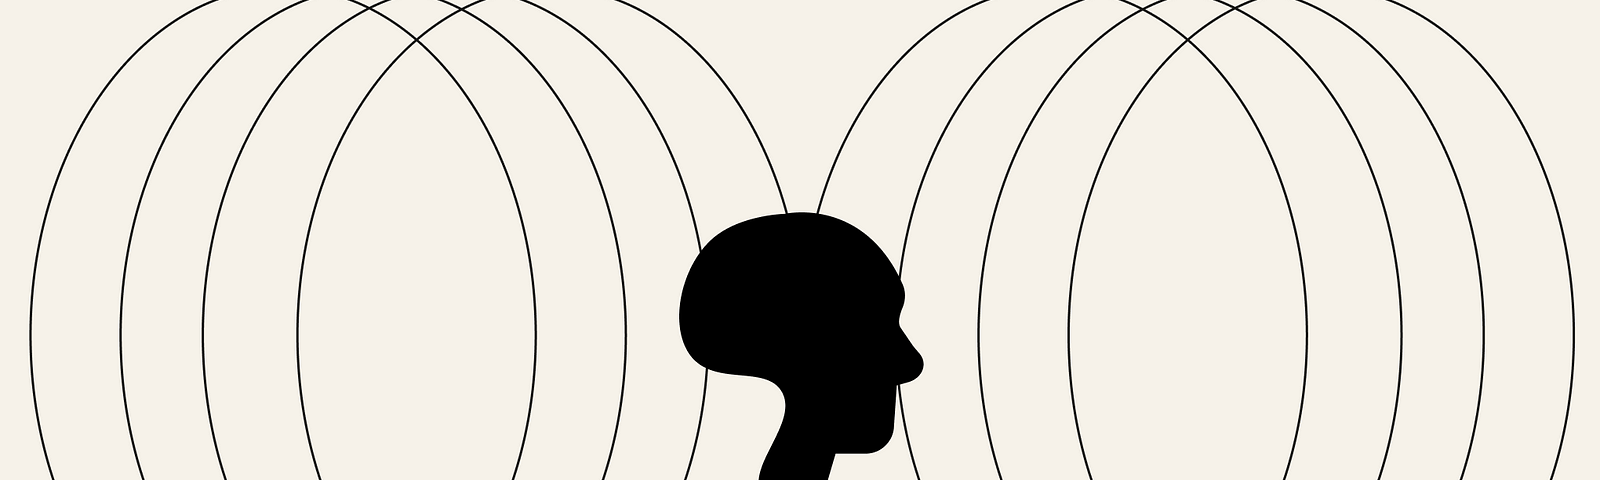 An illustrative head in a side profile in the middle of graphic circles